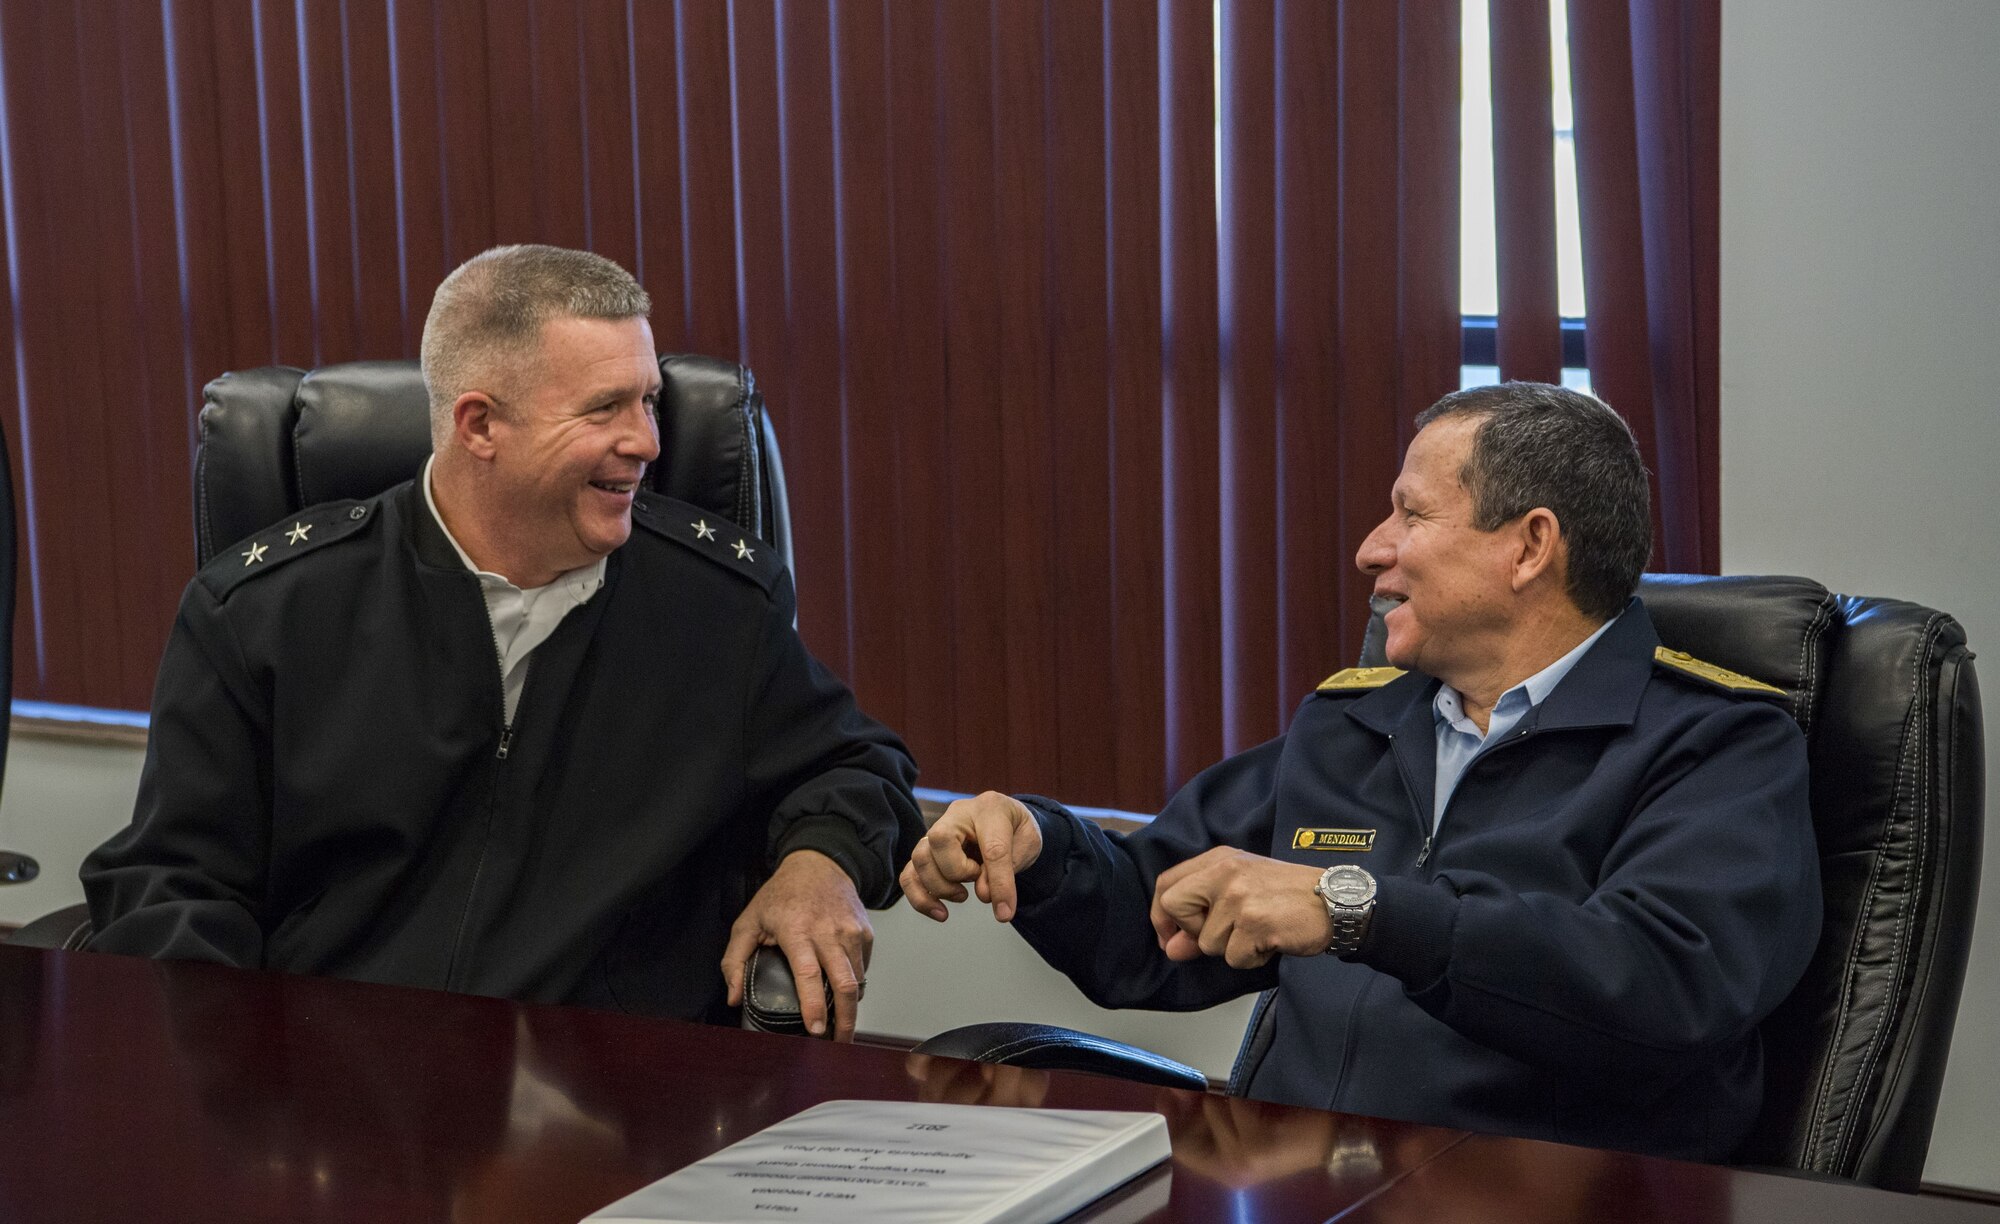 U.S. Army Maj. Gen. James A. Hoyer, the Adjutant General of the West Virginia National Guard, shares a laugh with Peruvian Air Force Maj. Gen. Gregorio C. Mendiola, Assistant Defense and Air Attaché for the Embassy of Peru, while discussing ways in which the West Virginia National Guard and the country of Peru’s military can extend their partnership Nov. 21, 2017 at McLaughlin Air National Guard Base, Charleston, W.Va. The State Partnership Program (SPP) is designed to build and improve relations around the globe through 73 security partnerships with different countries, including Peru as West Virginia’s partner. (U.S. Air National Guard Photo by Airman Caleb Vance)